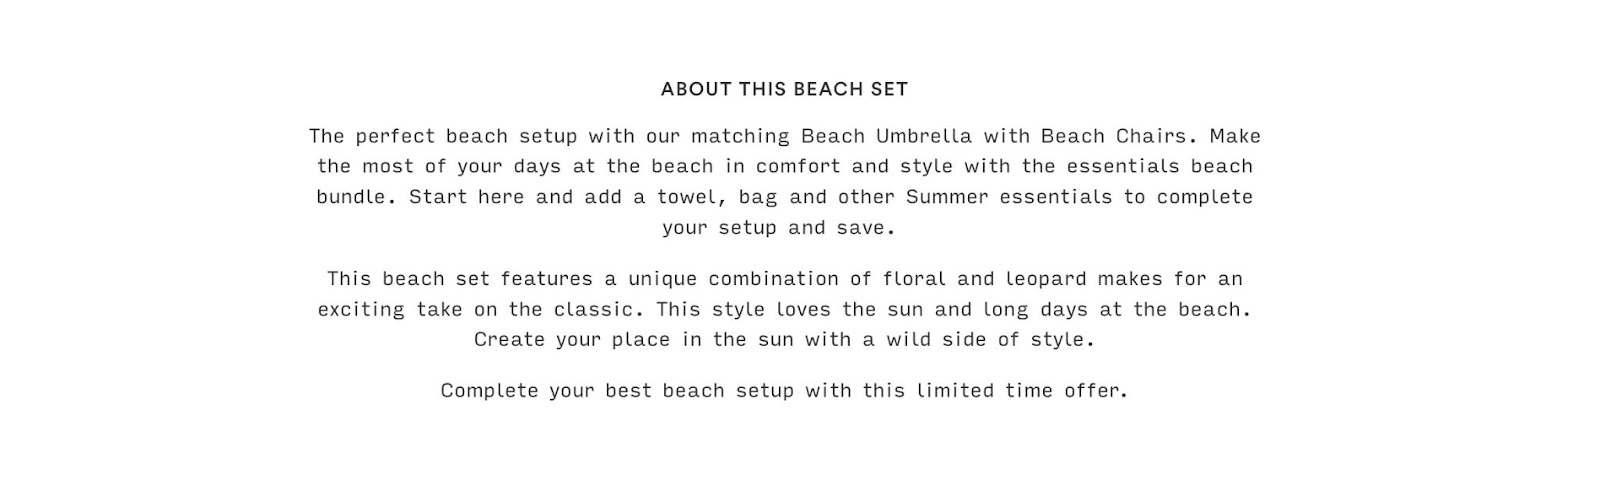 Text reads "About this beach set: The perfect beach setup with our matching beach umbrella with beach chairs. Make the most of your days at the beach in comfort and style with the essentials beach bundle. Start here and add a towel, bag and other summer essentials to complete your setup and save. This beach set features a unique combination of floral and leopard makes for an ecviting take on the classic. This style loves the sun and long days at the beach. Create your place in the sun with a wild side of style. Complete your best beach setup with this limited supply offer."